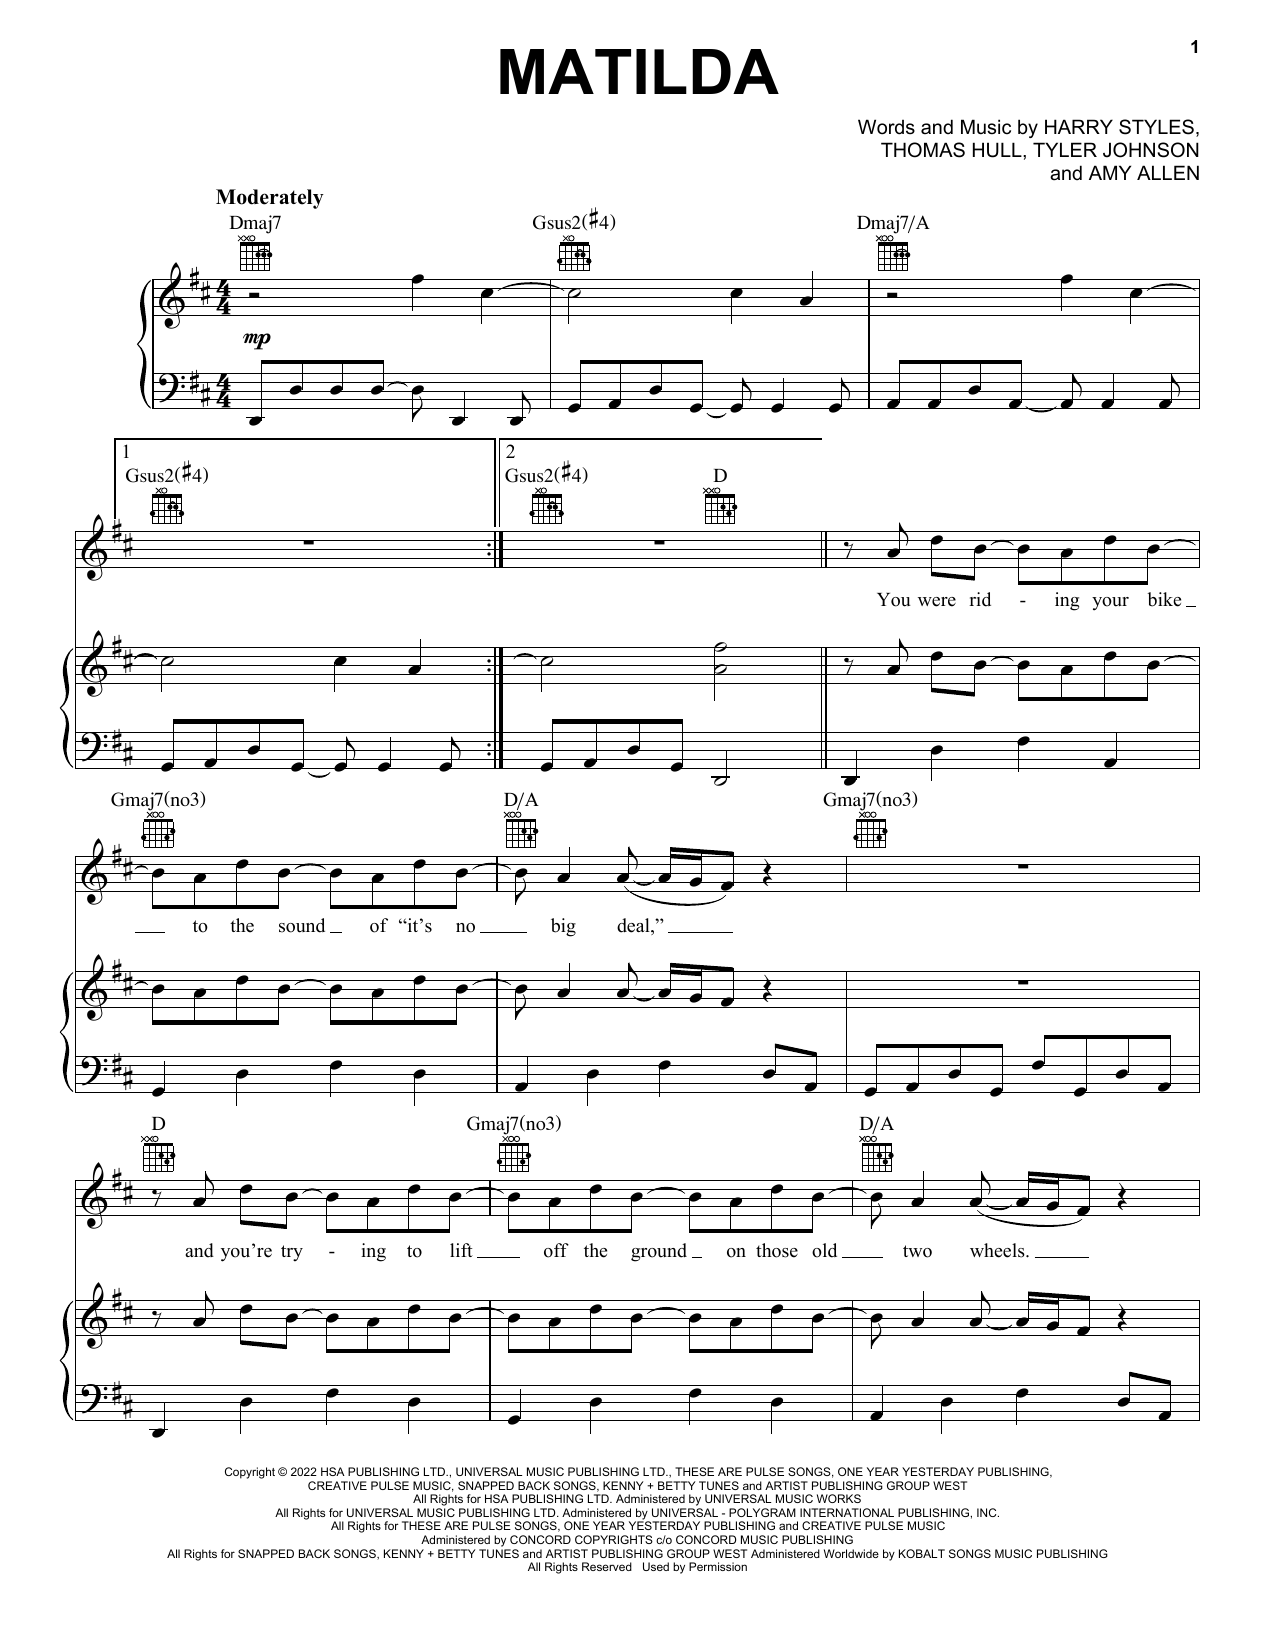 Harry Styles Matilda sheet music notes and chords. Download Printable PDF.